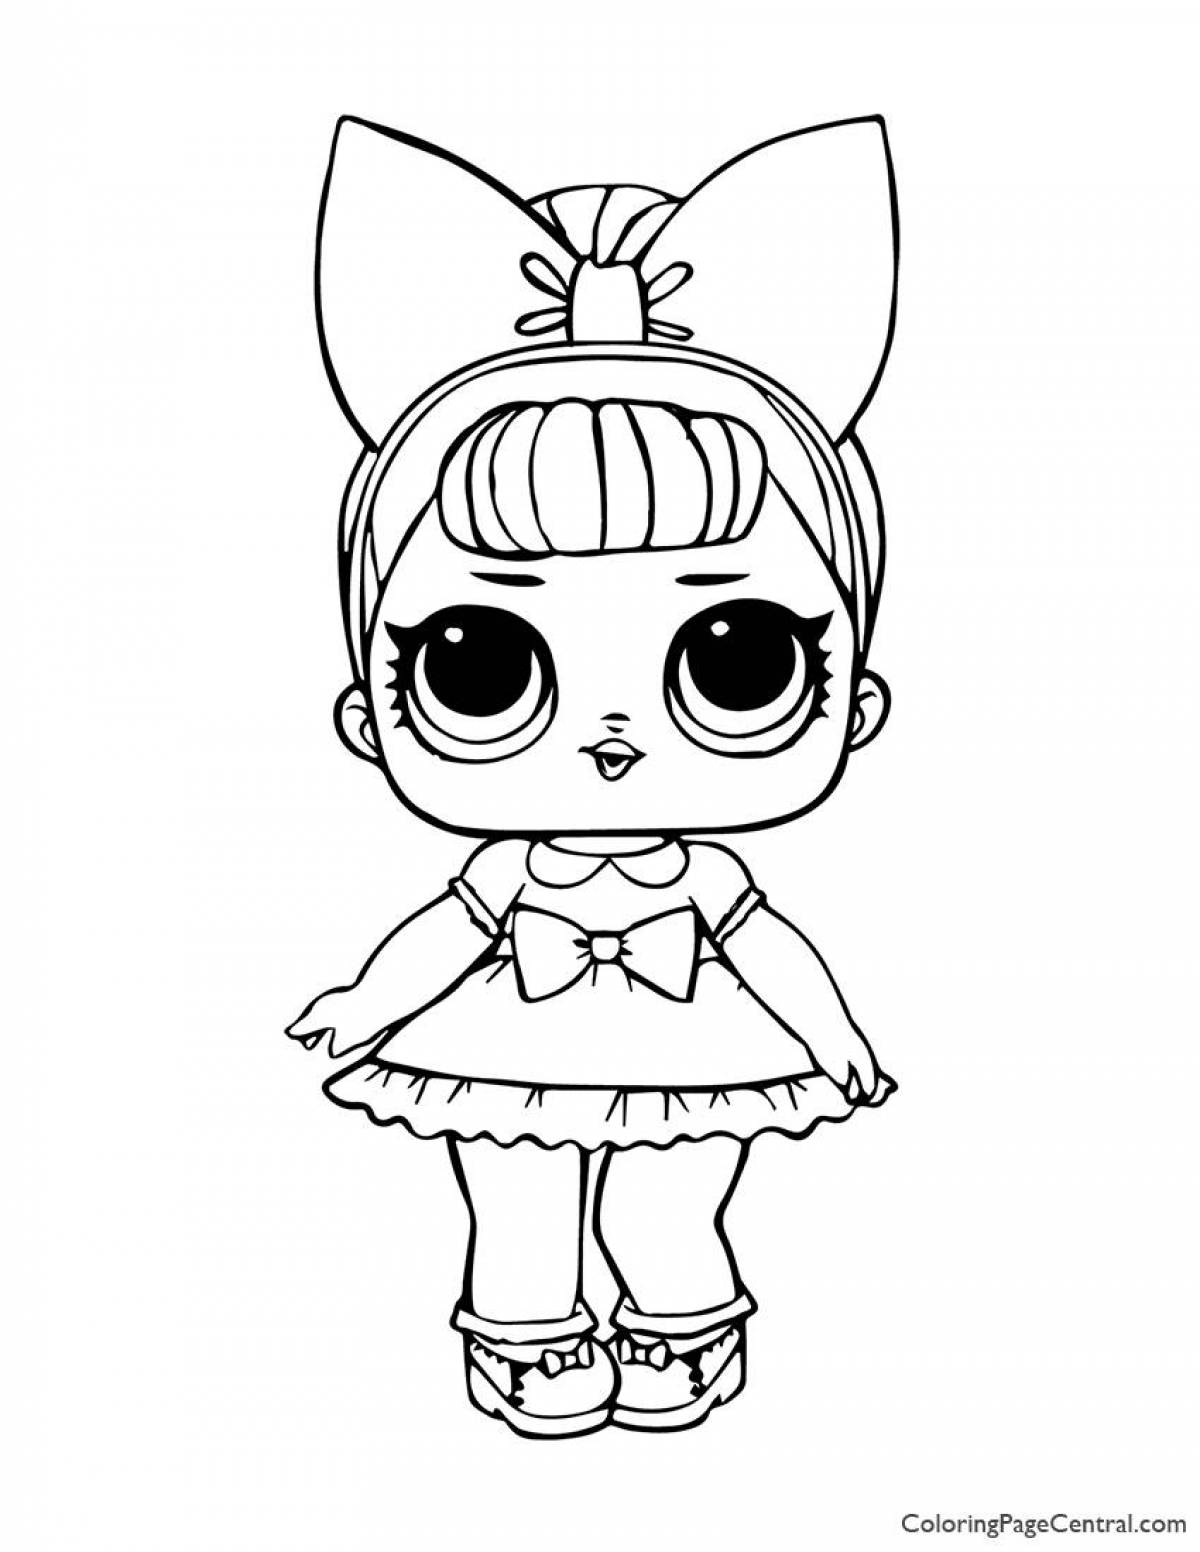 Exquisite lol doll coloring book